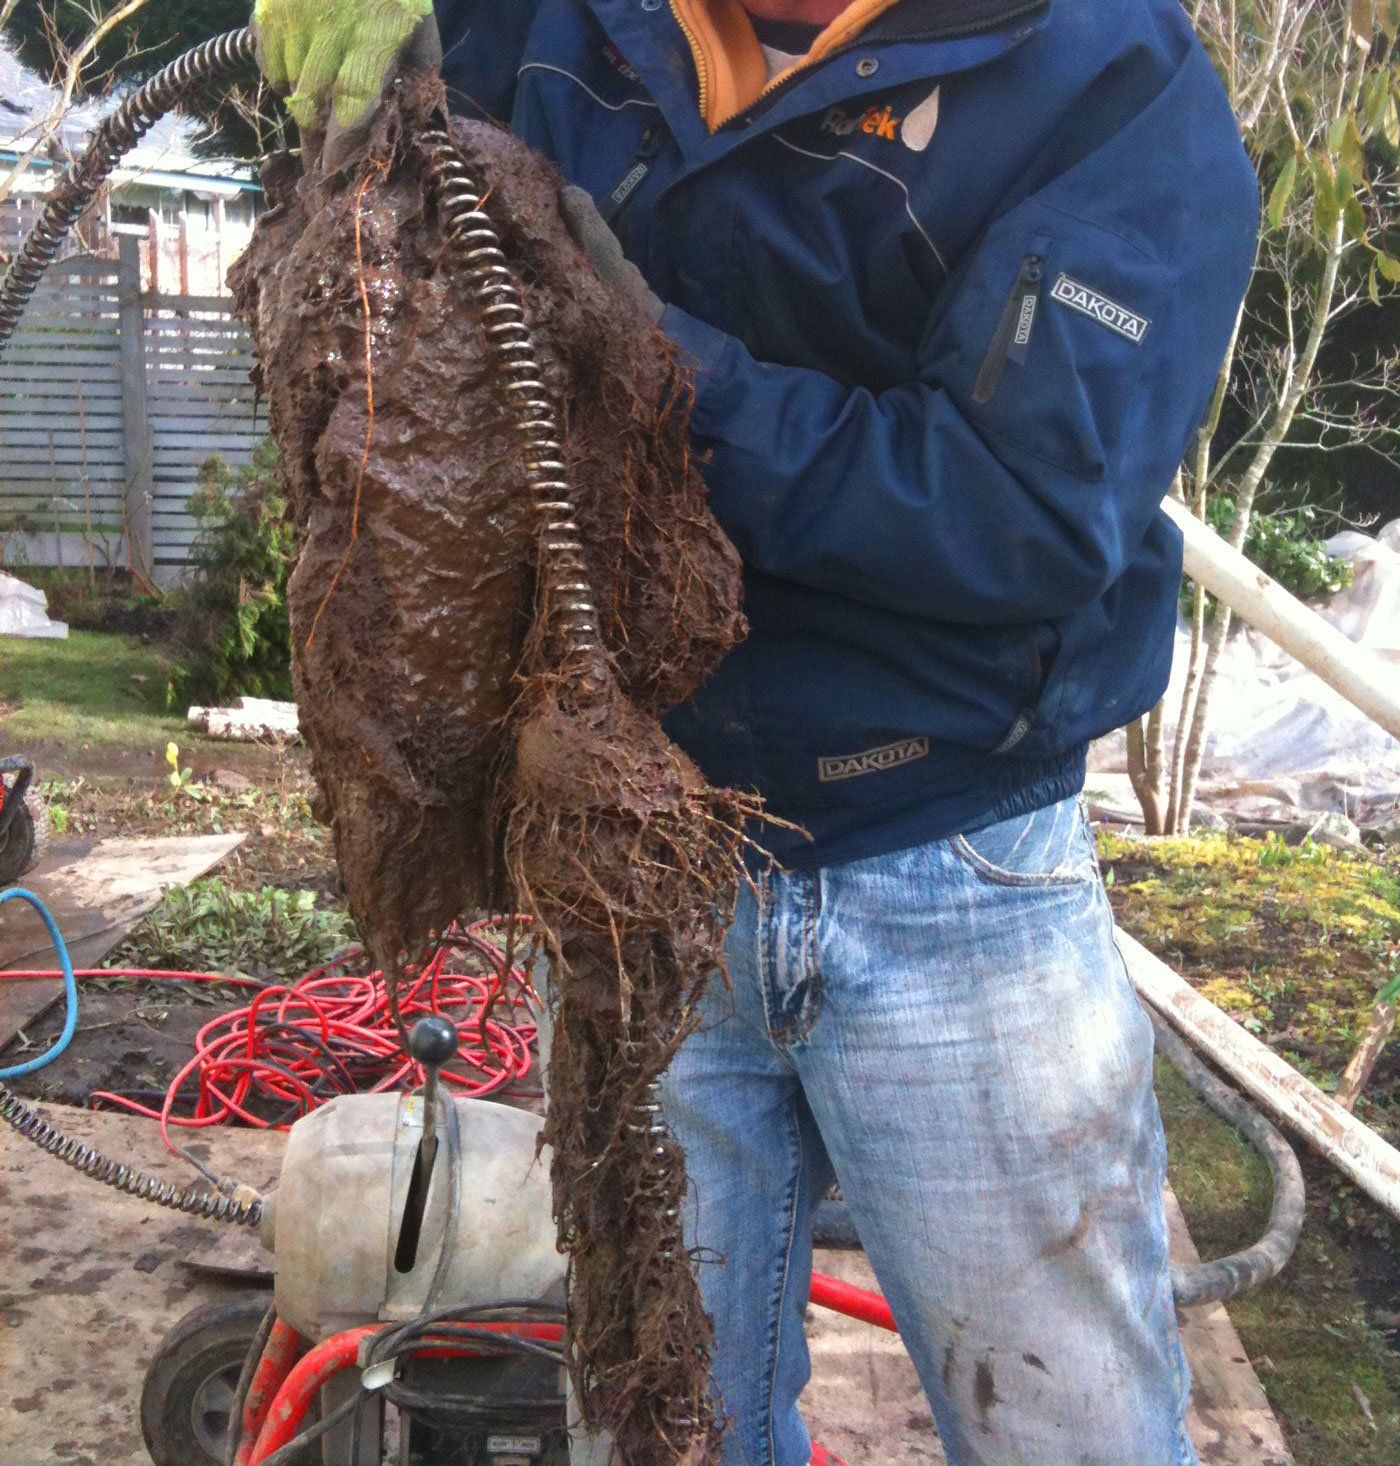 A drain auger AKA rotating rooter clumped up with tree roots after rootering a clogged drain pipe in Victoria BC